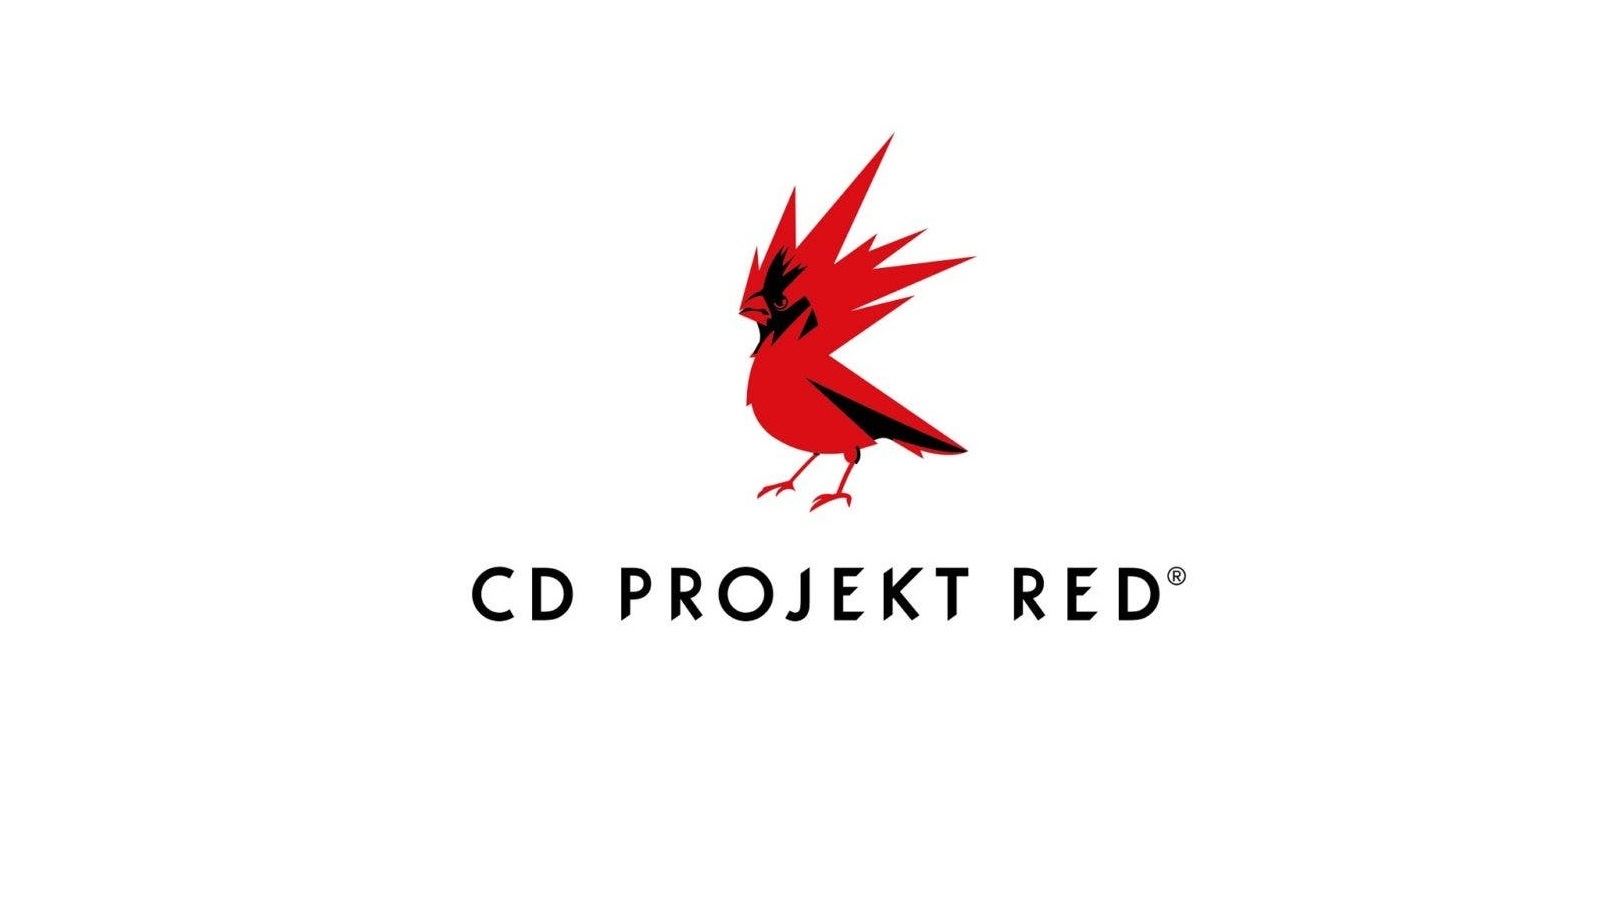 CD Projekt RED, The Witcher, Cyberpunk, gaming